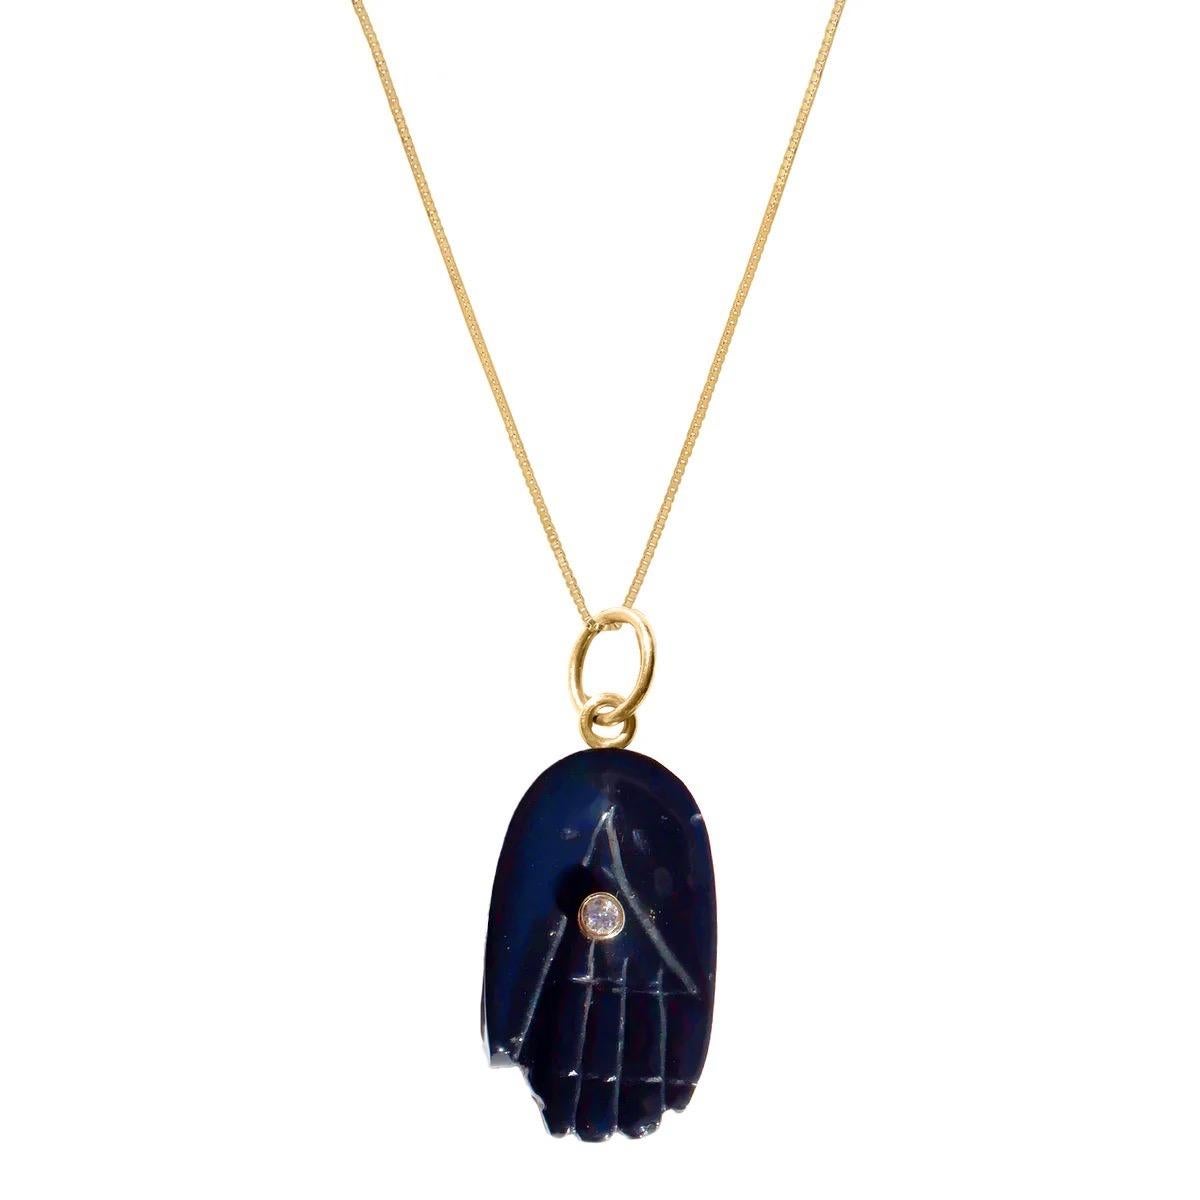 Black Spinel Diamond Gold Hamsa Pendant. Peace and Protection for all with the universal symbol of the Hamsa featuring a pendant in glossy natural black spinel with a center gold encased diamond 'eye’.

- Black Spinel apprx 35 carats.
- Set with an